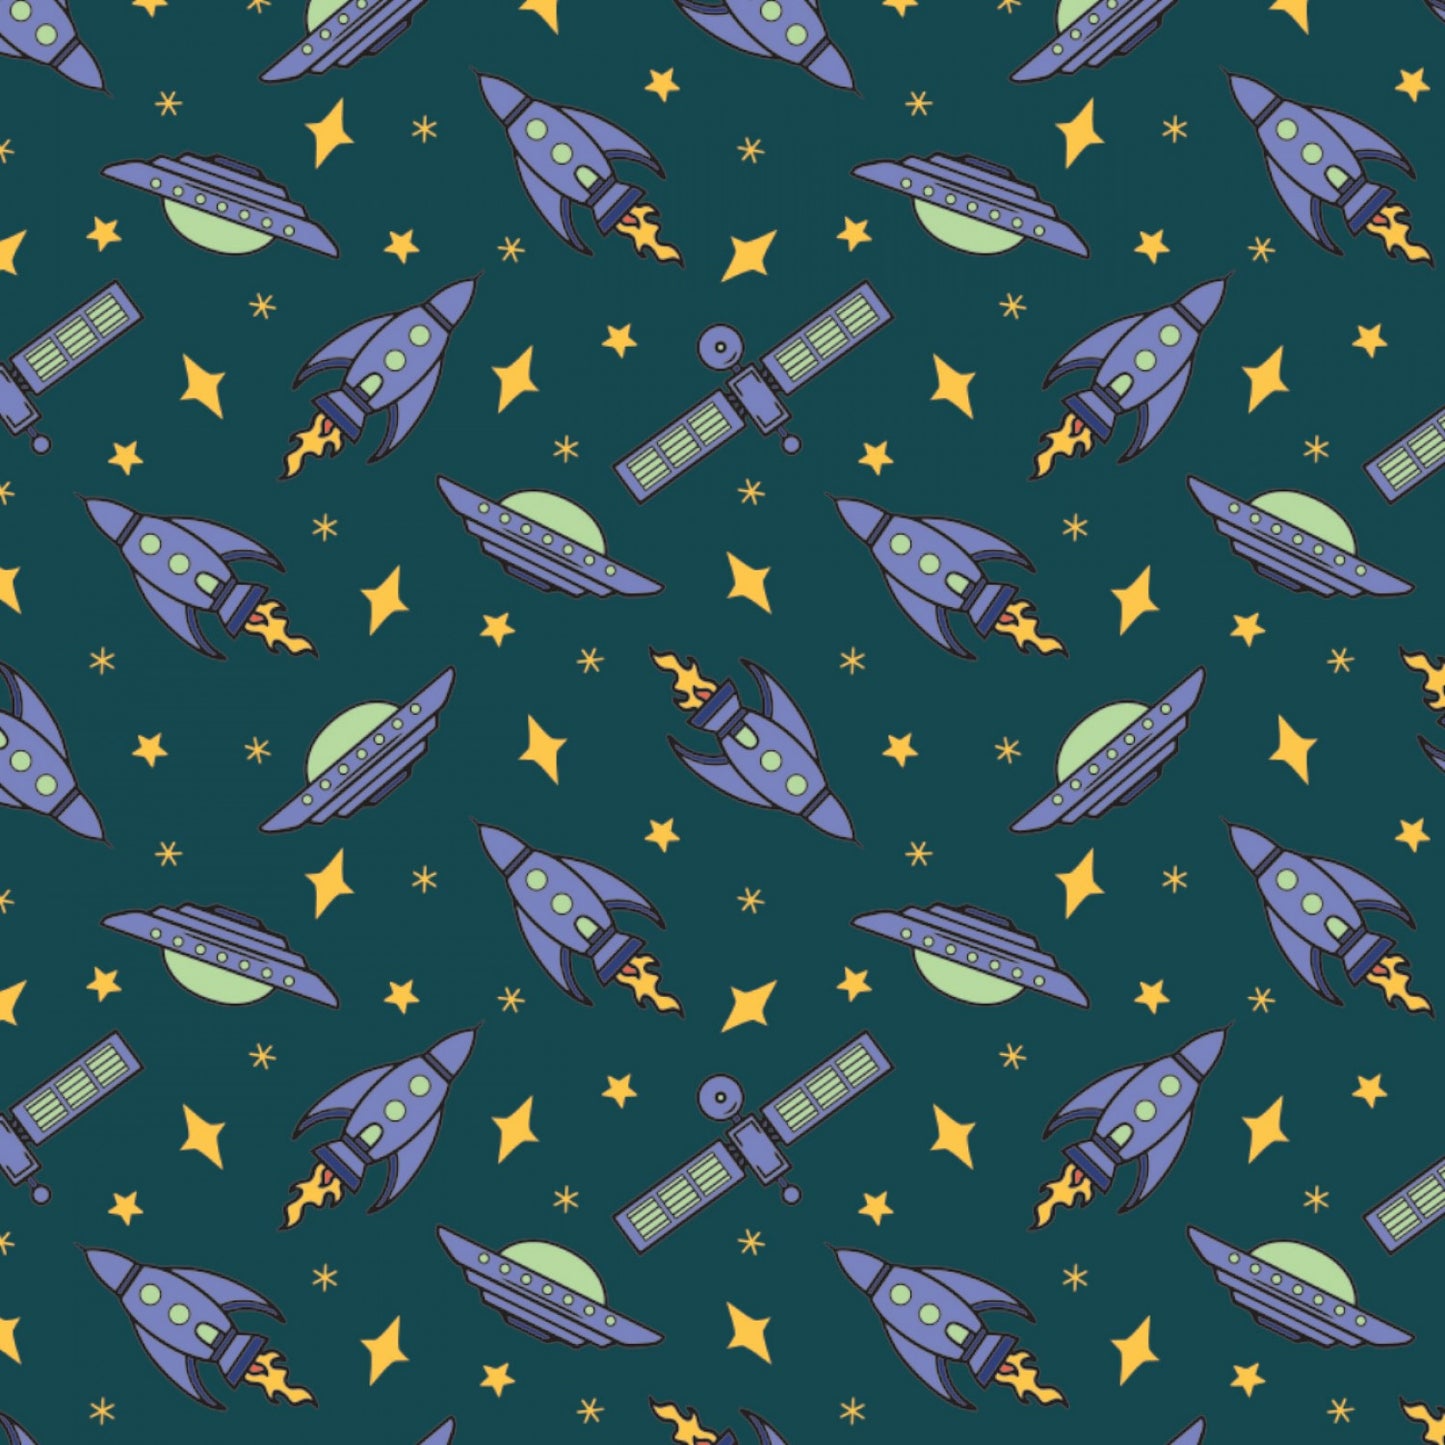 I Want to Believe Space Exploration Teal    21210502-2 Cotton Woven Fabric